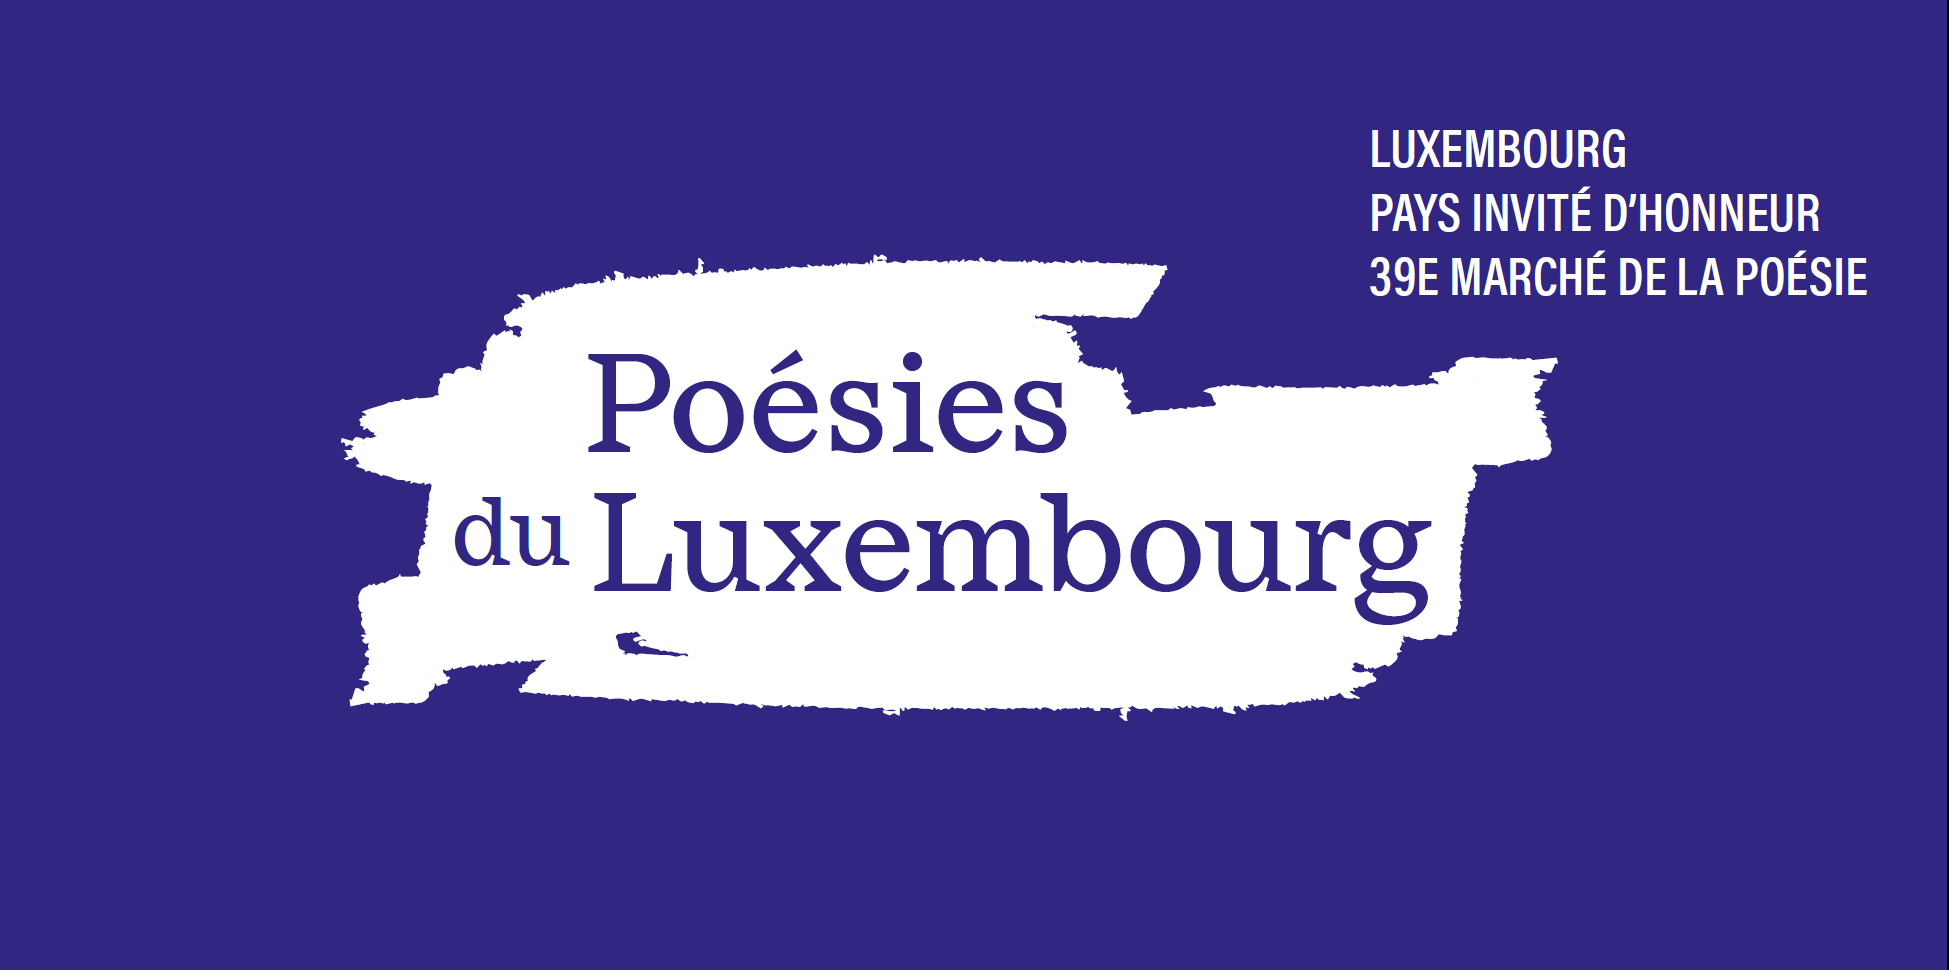 Luxembourg's poetry in the spotlight at the 39th Marché de la Poésie